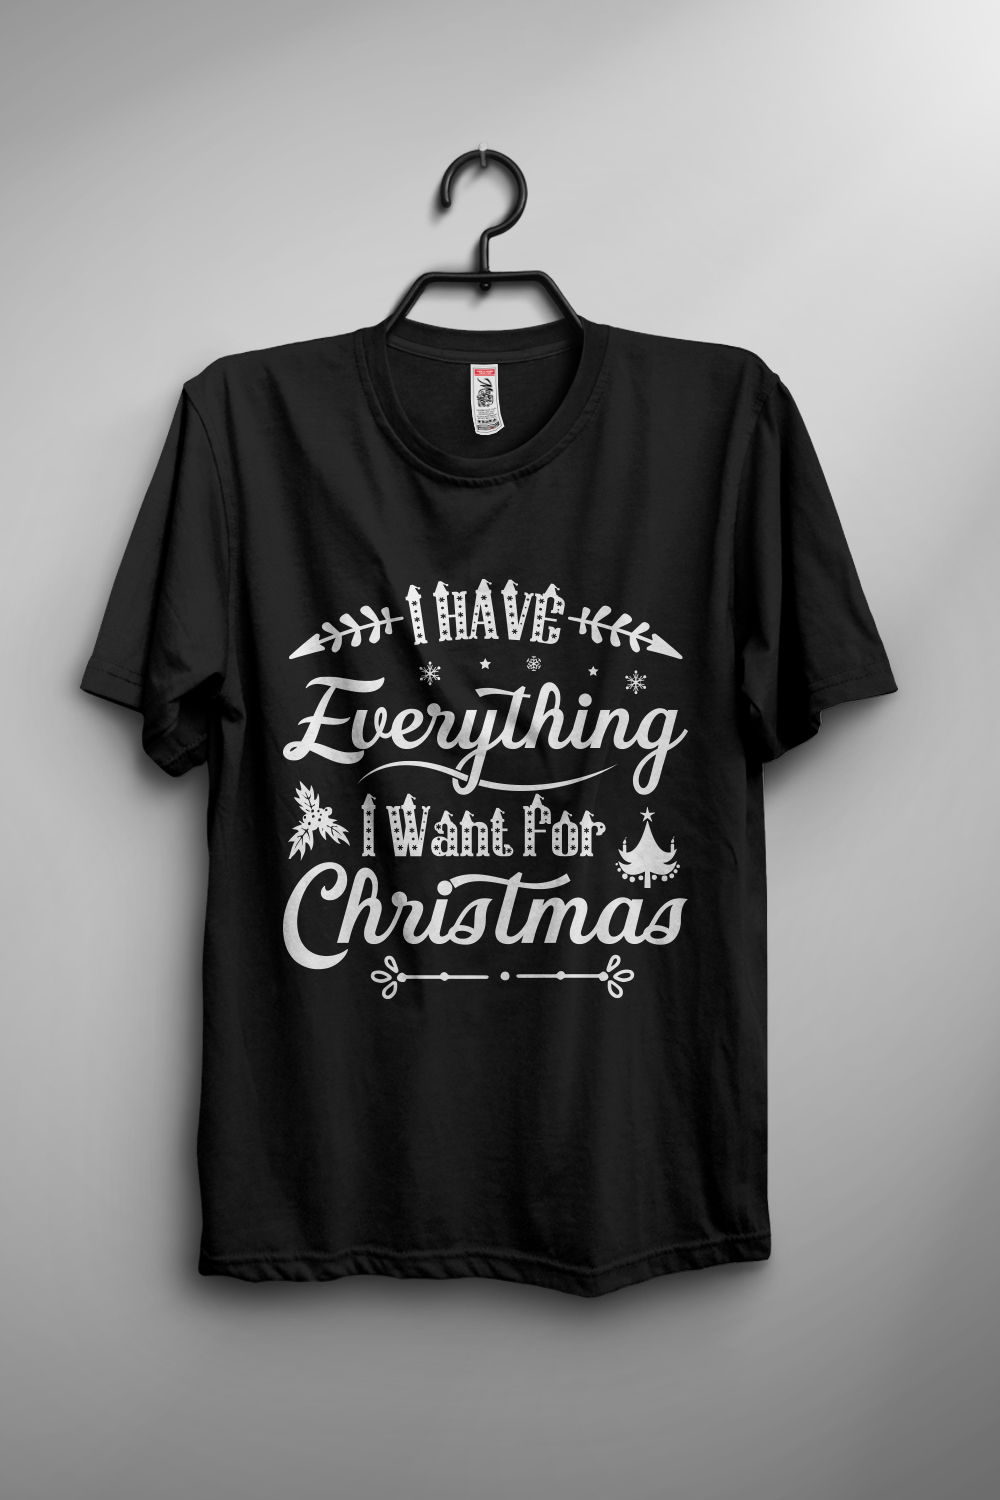 I have everything i want for christmas T-shirt design pinterest preview image.